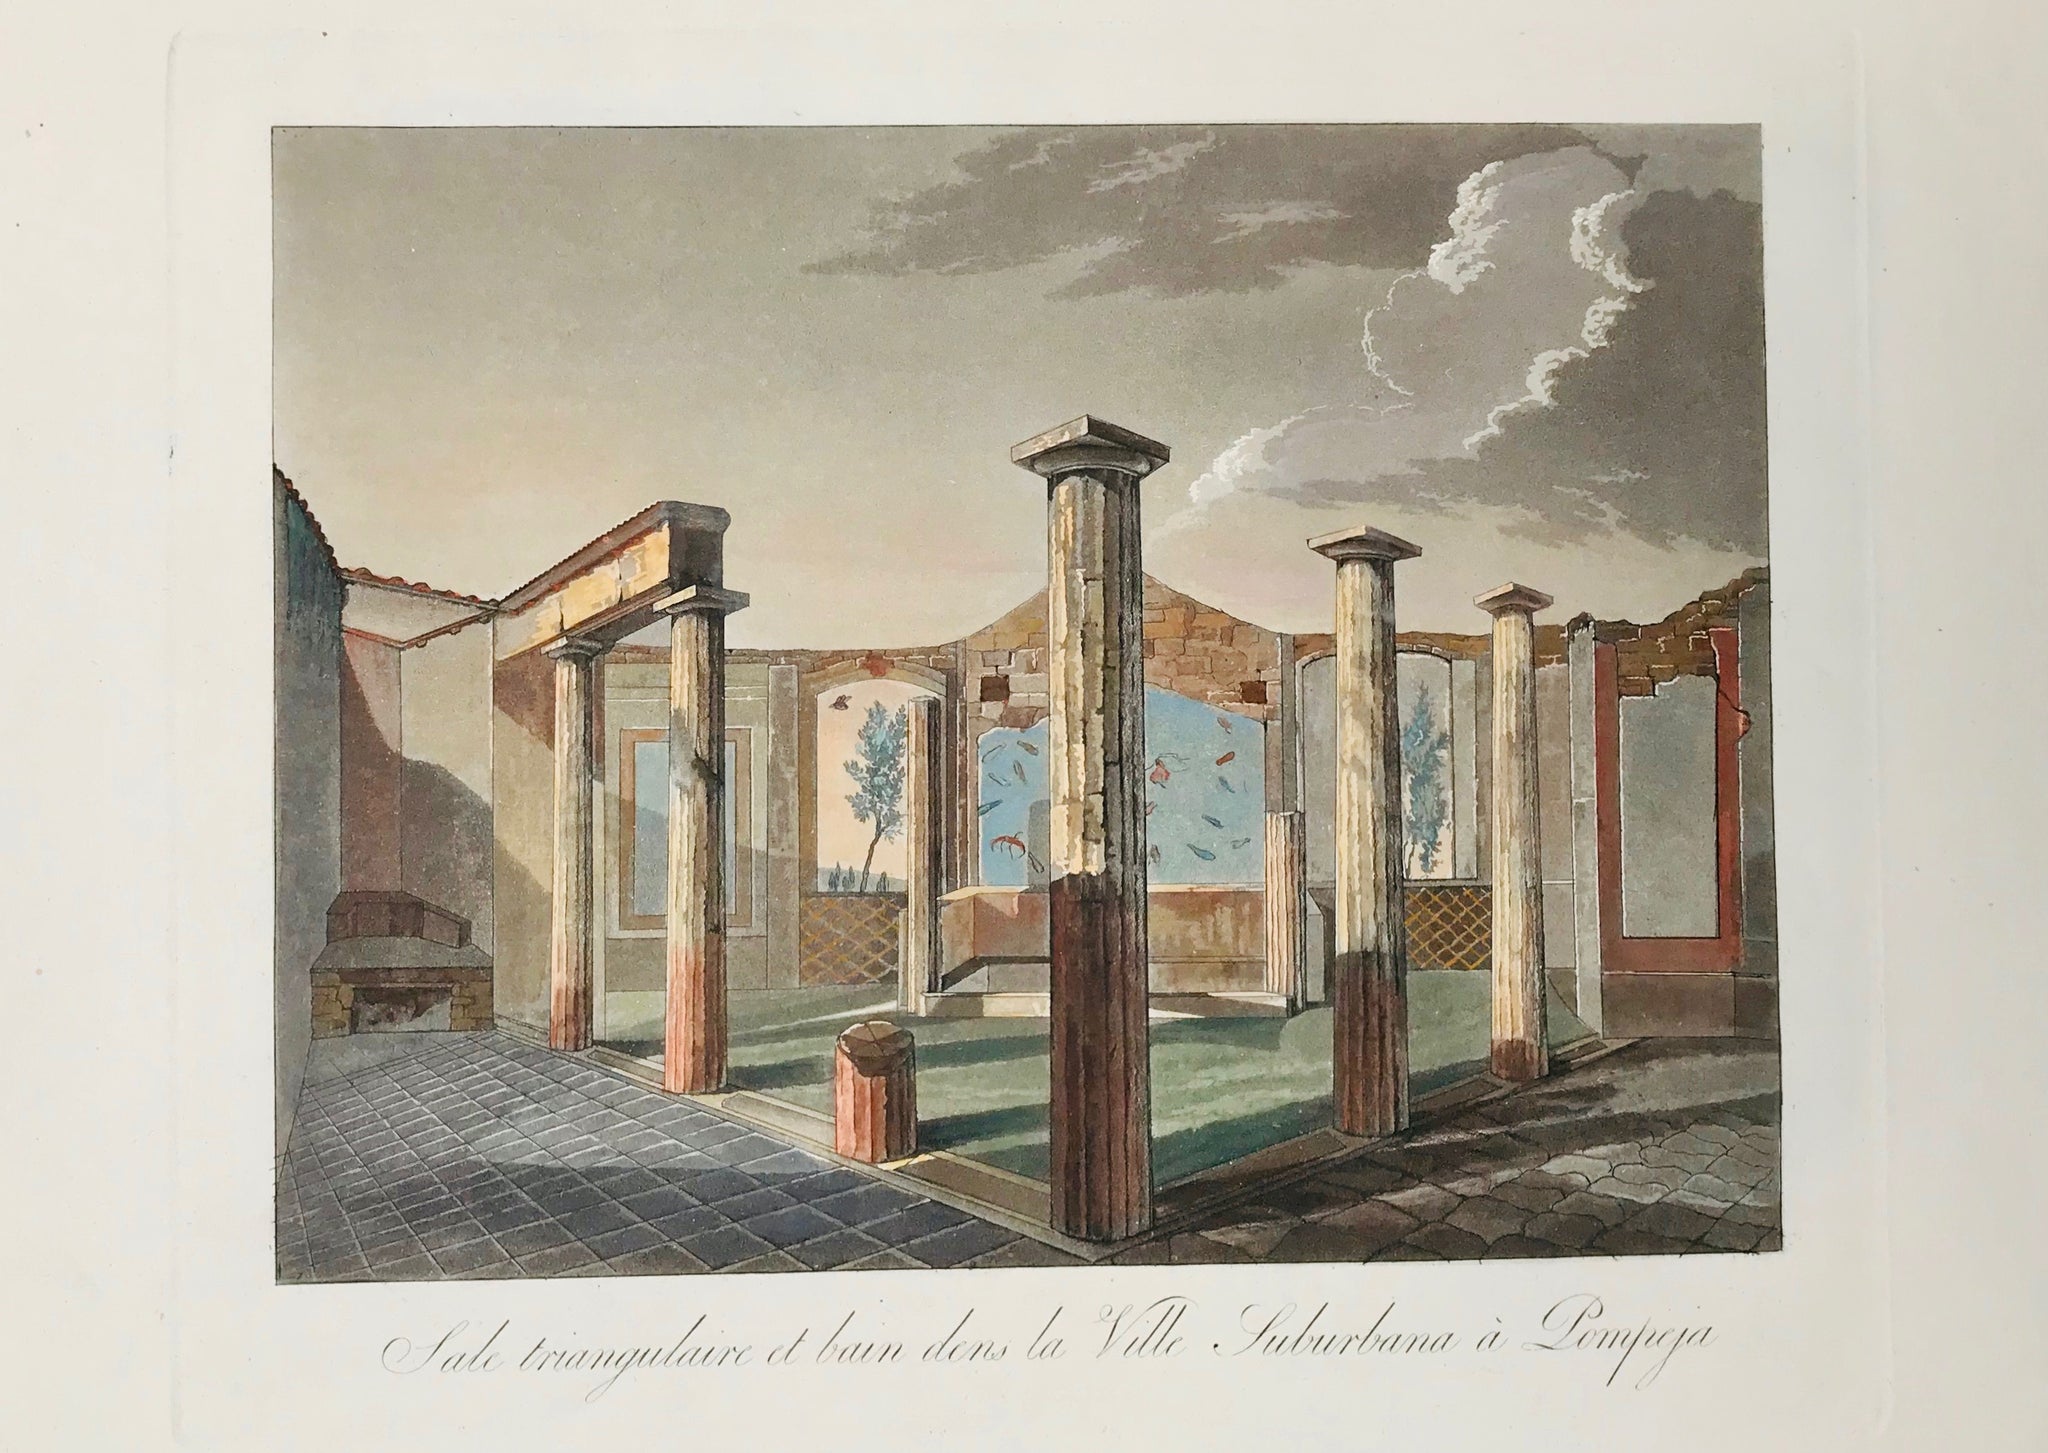 Sale triangulaire et bain dens la Ville Suburbana à Pompeji  21.6 x 28 cm ( 8.5 x 11 ")    Aquatints engraved by Paul Fumagalli from 1821-1825  These prints with their velvety aquatint appearance were made to delight our hearts. They portrait, like no others, the elegance of architecture and the luxurious lifestyle of the citizens of the ancient city - until the nearby Vesuvius put an end to it all in a devestating rain of volcanic ashes.